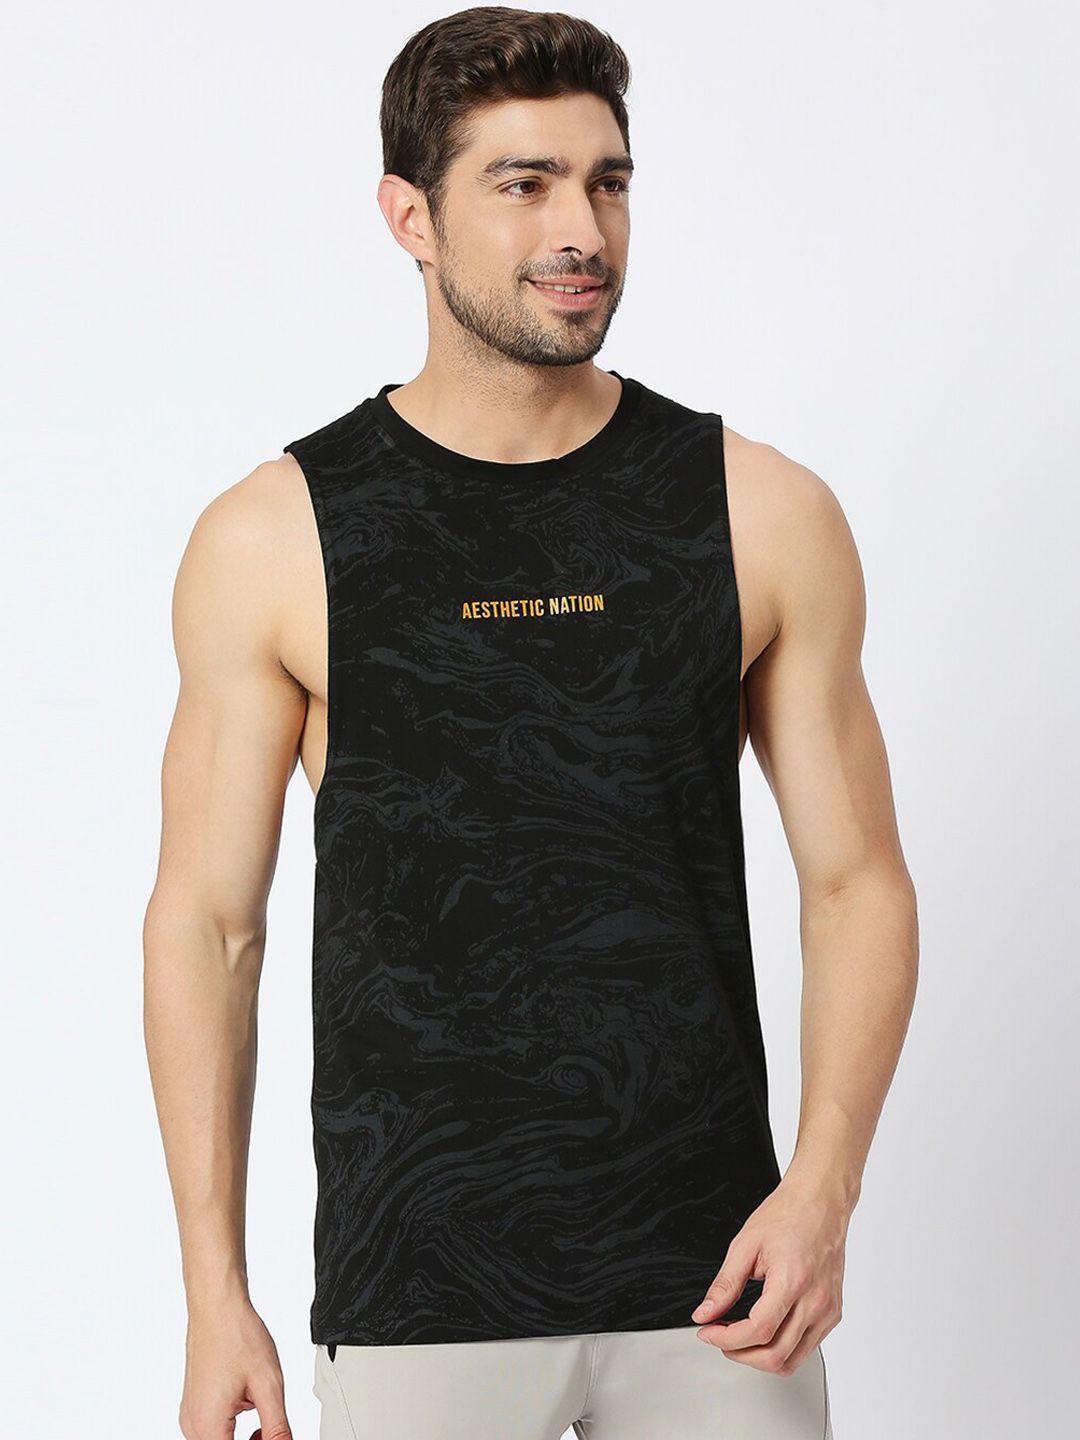 aesthetic-nation-abstract-printed-unparalled-comfort-cotton-sports-innerwear-vests